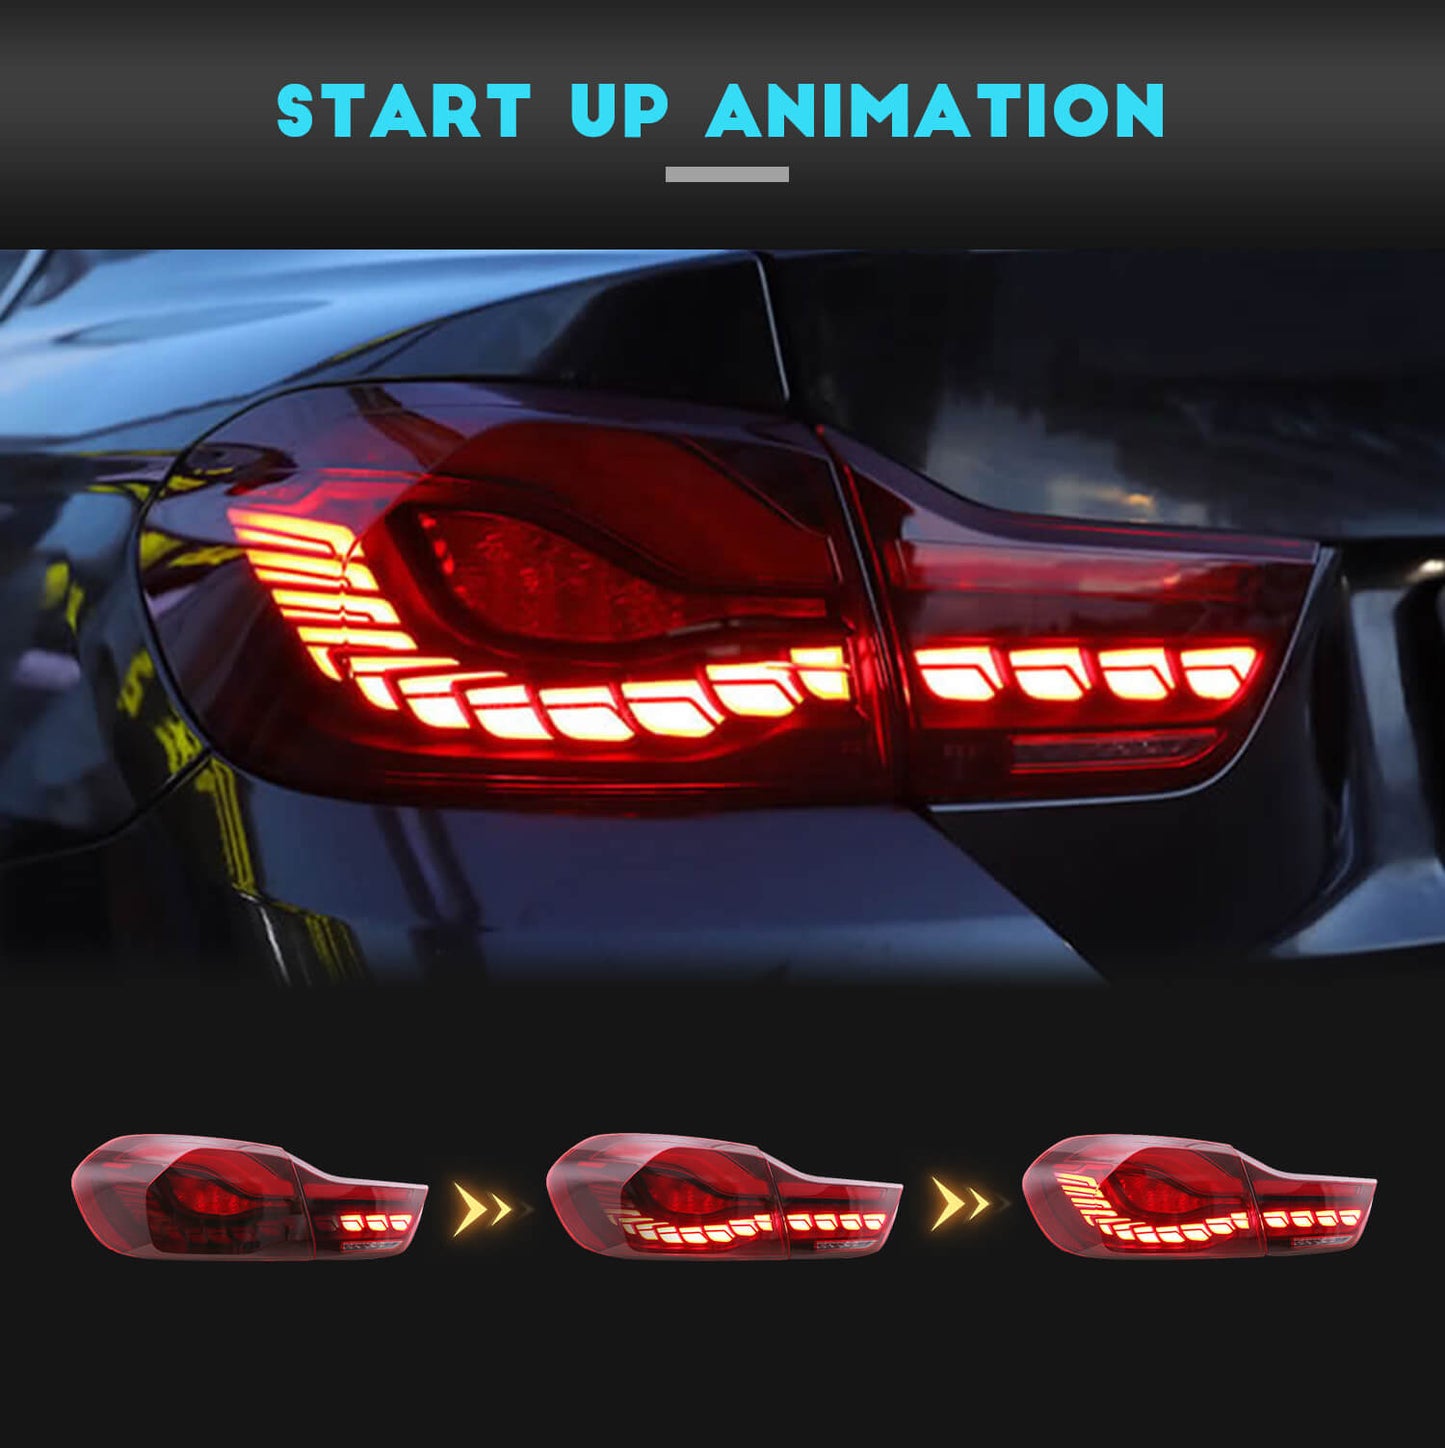 HCMOTION LED Tail Lights For BMW M4 2014-2020